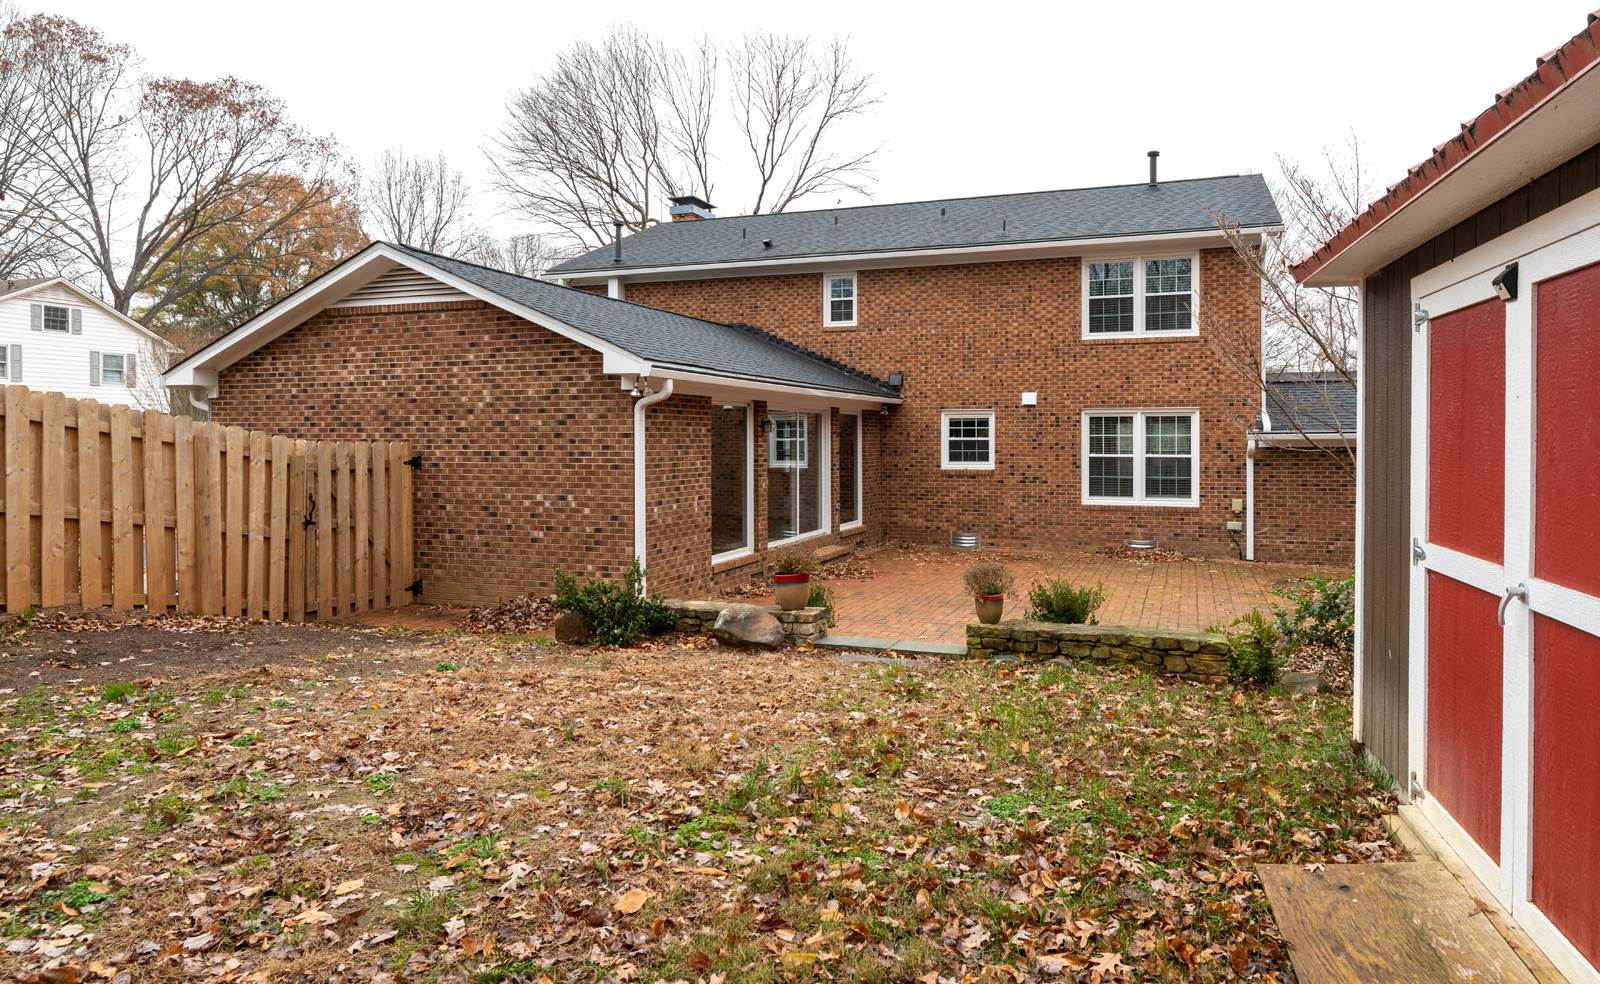 1407 Forest Hill Dr., Greensboro, NC 27410